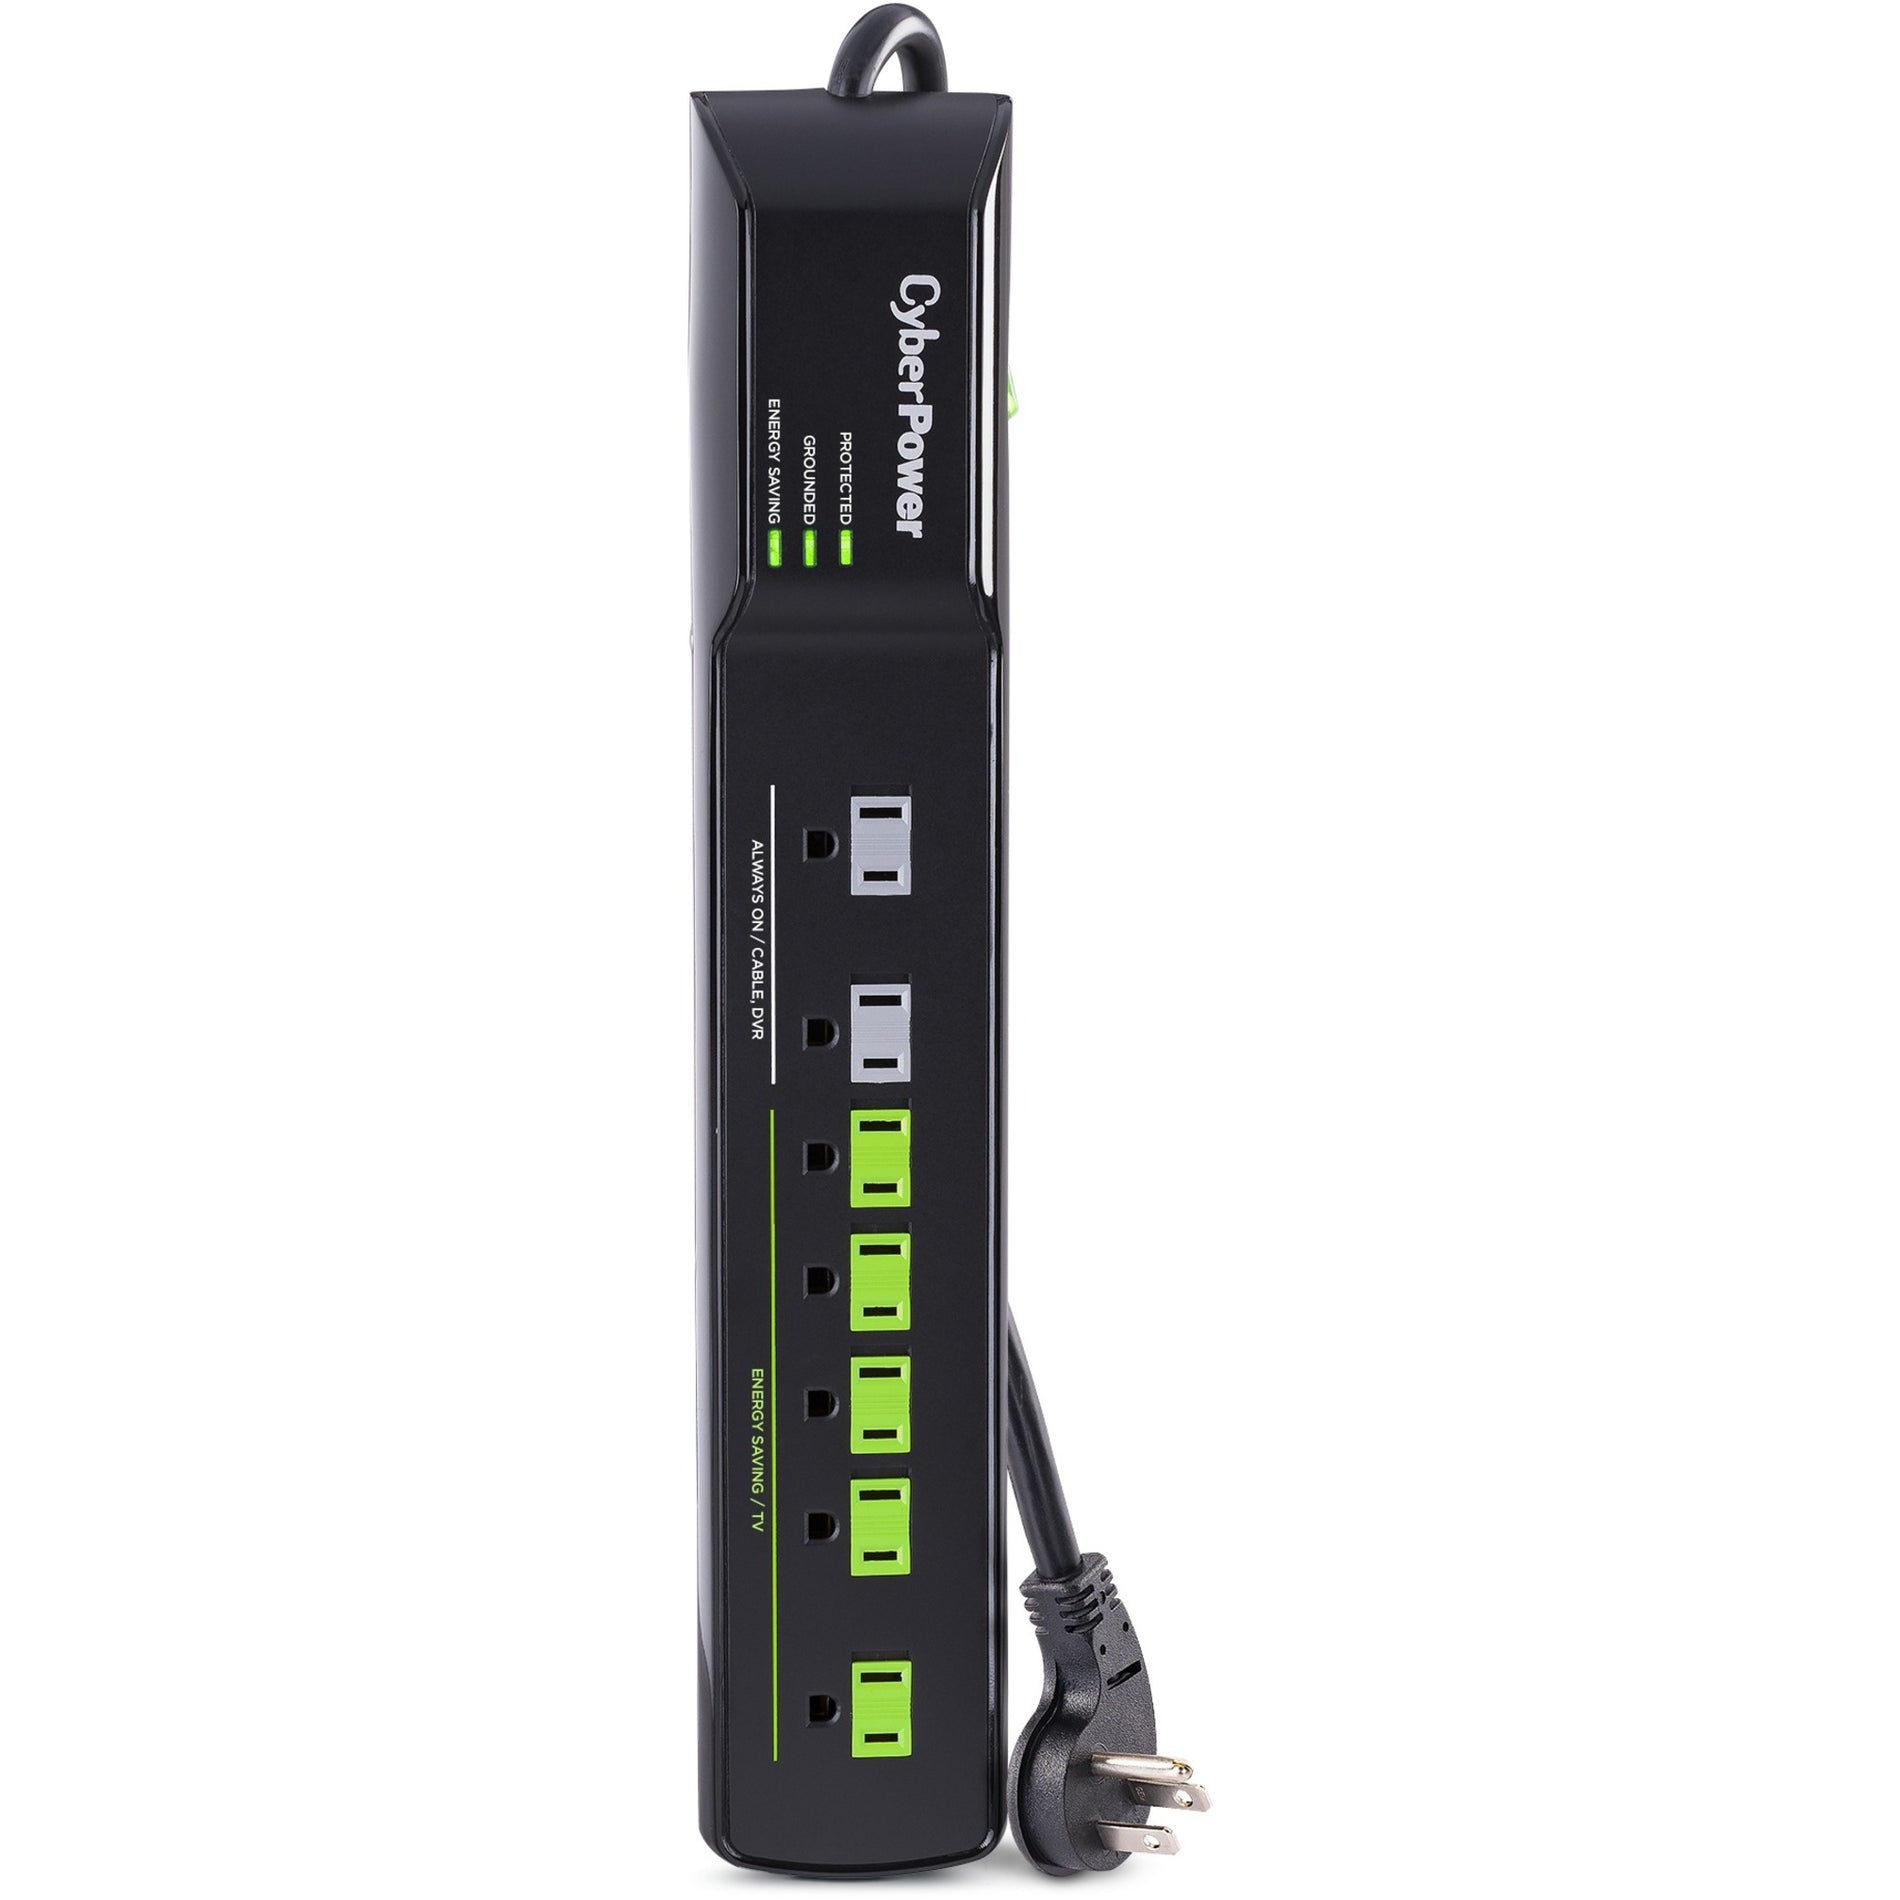 CyberPower HT705GR Advanced Power Strip Surge Protector, 7-Outlet Surge with 1500 J